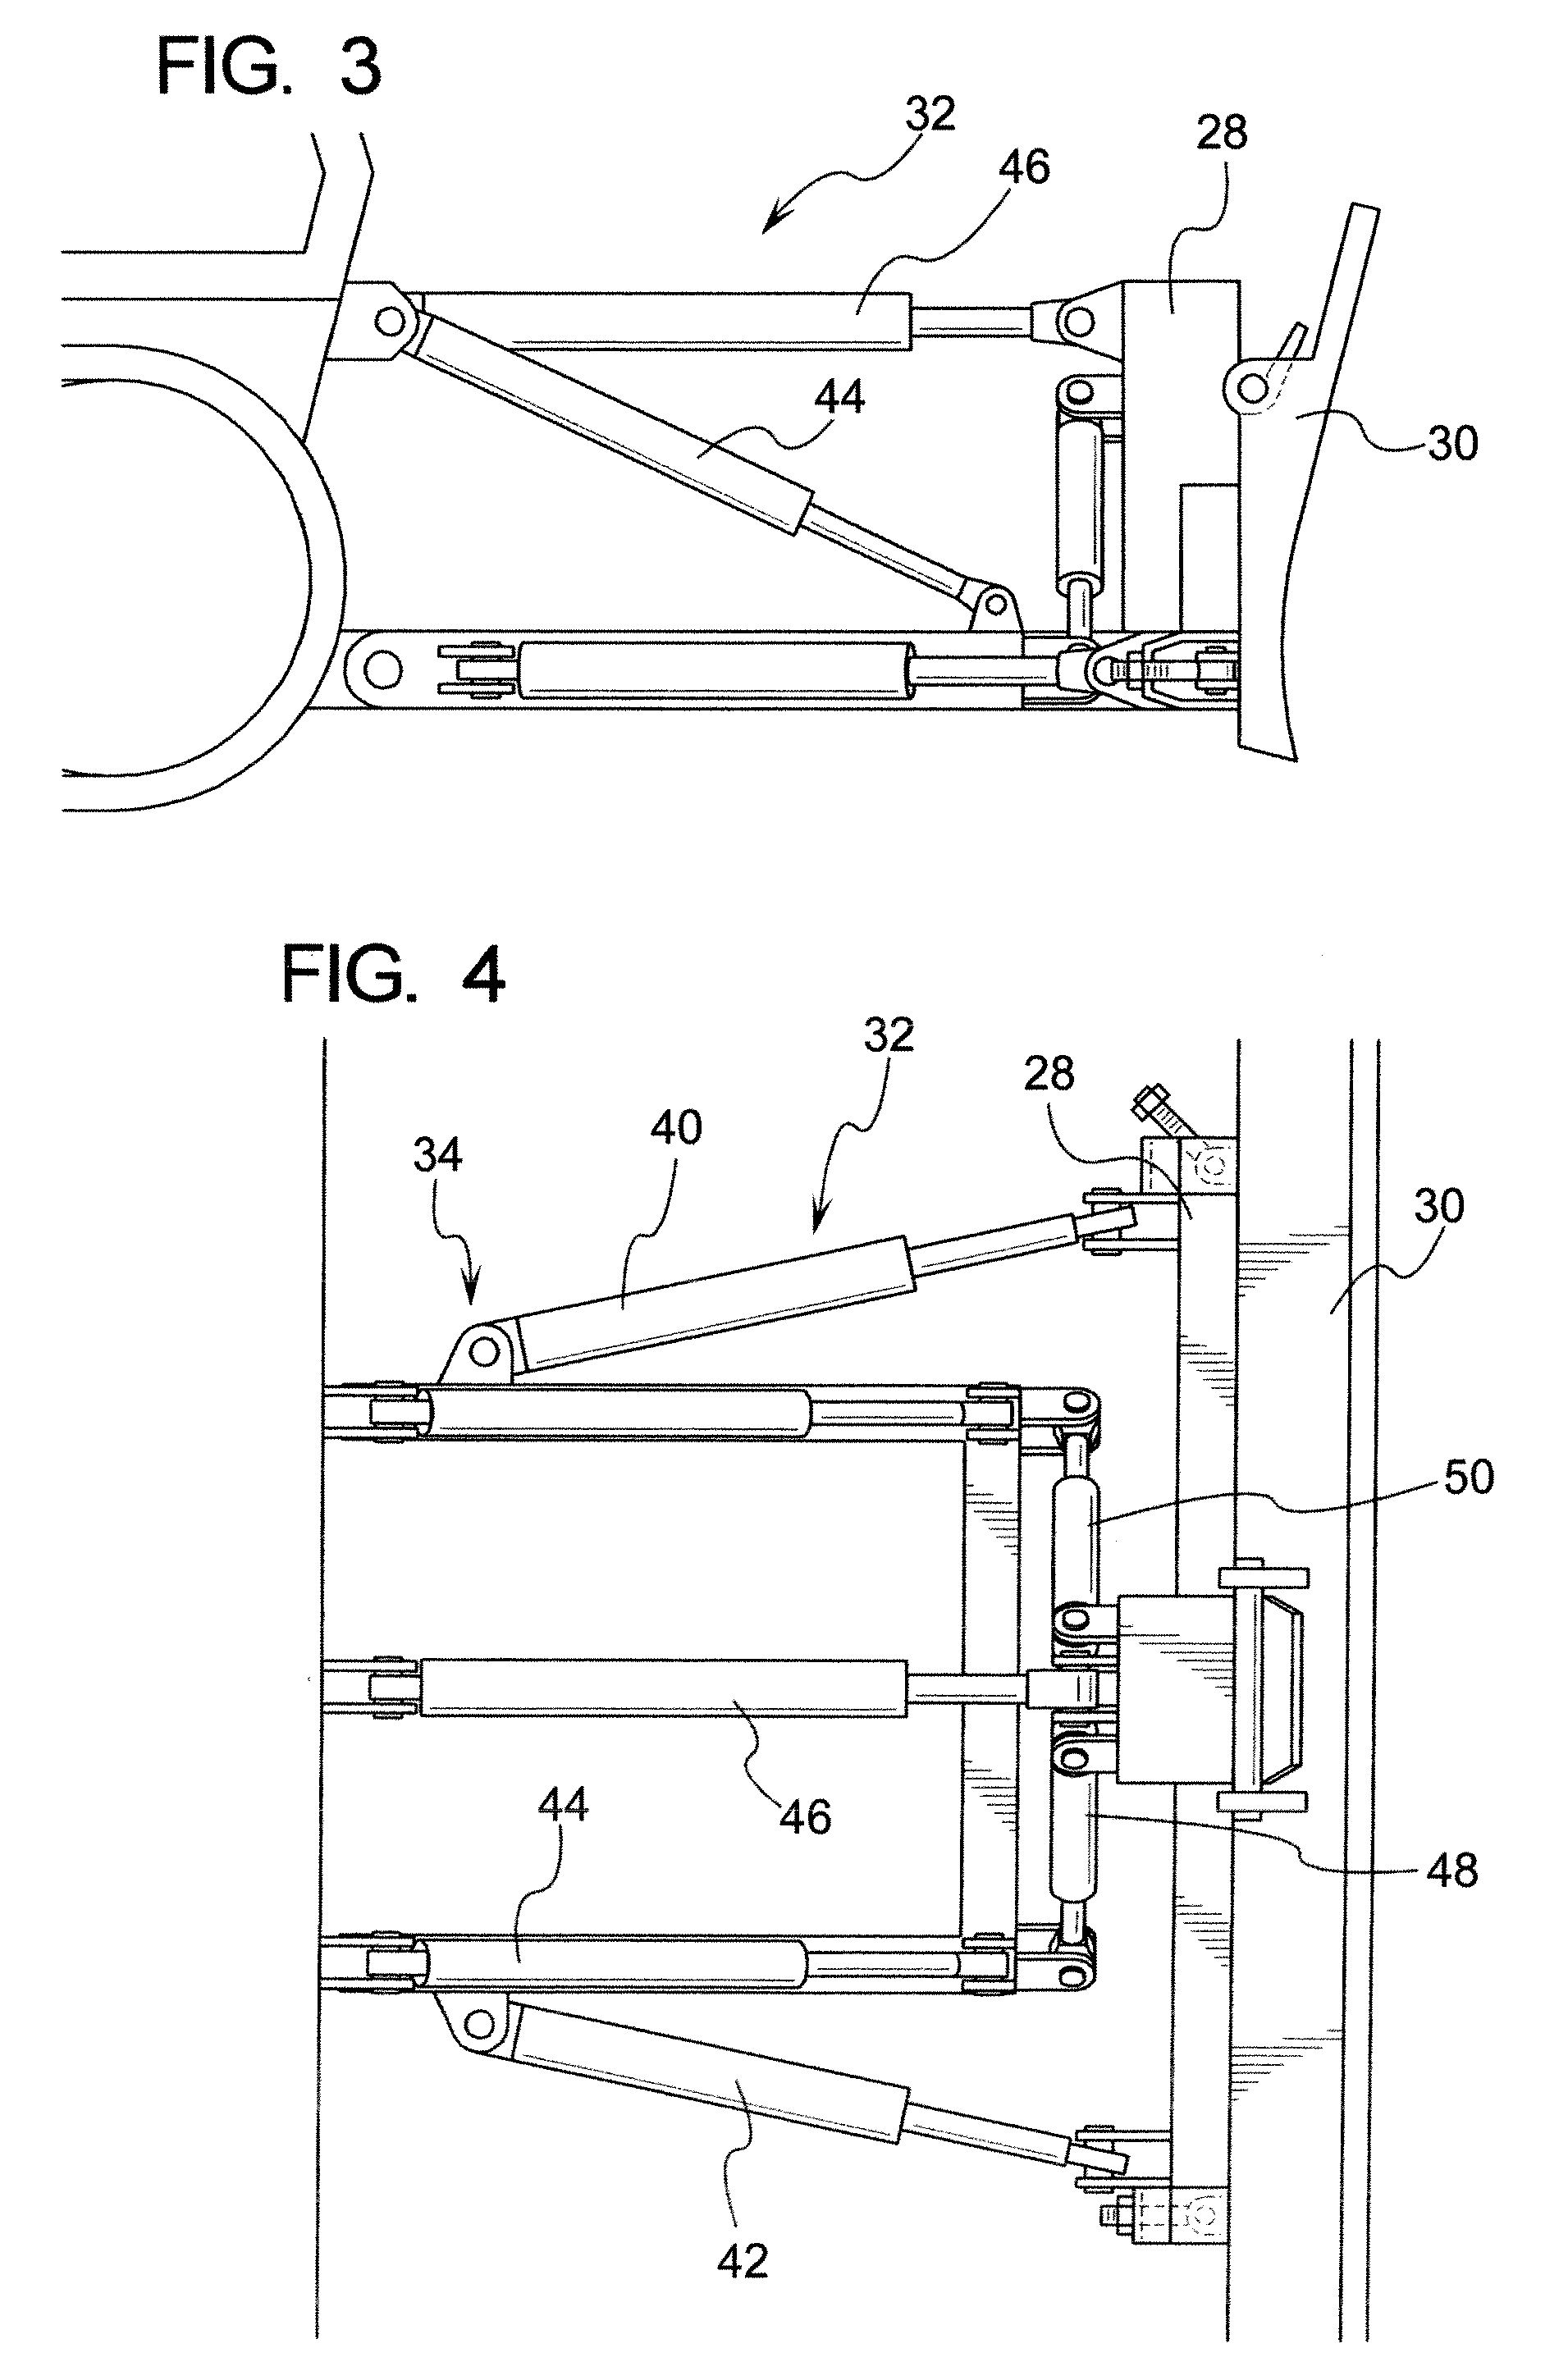 Detachable lifting mechanism for a tracked snow vehicle method and apparatus